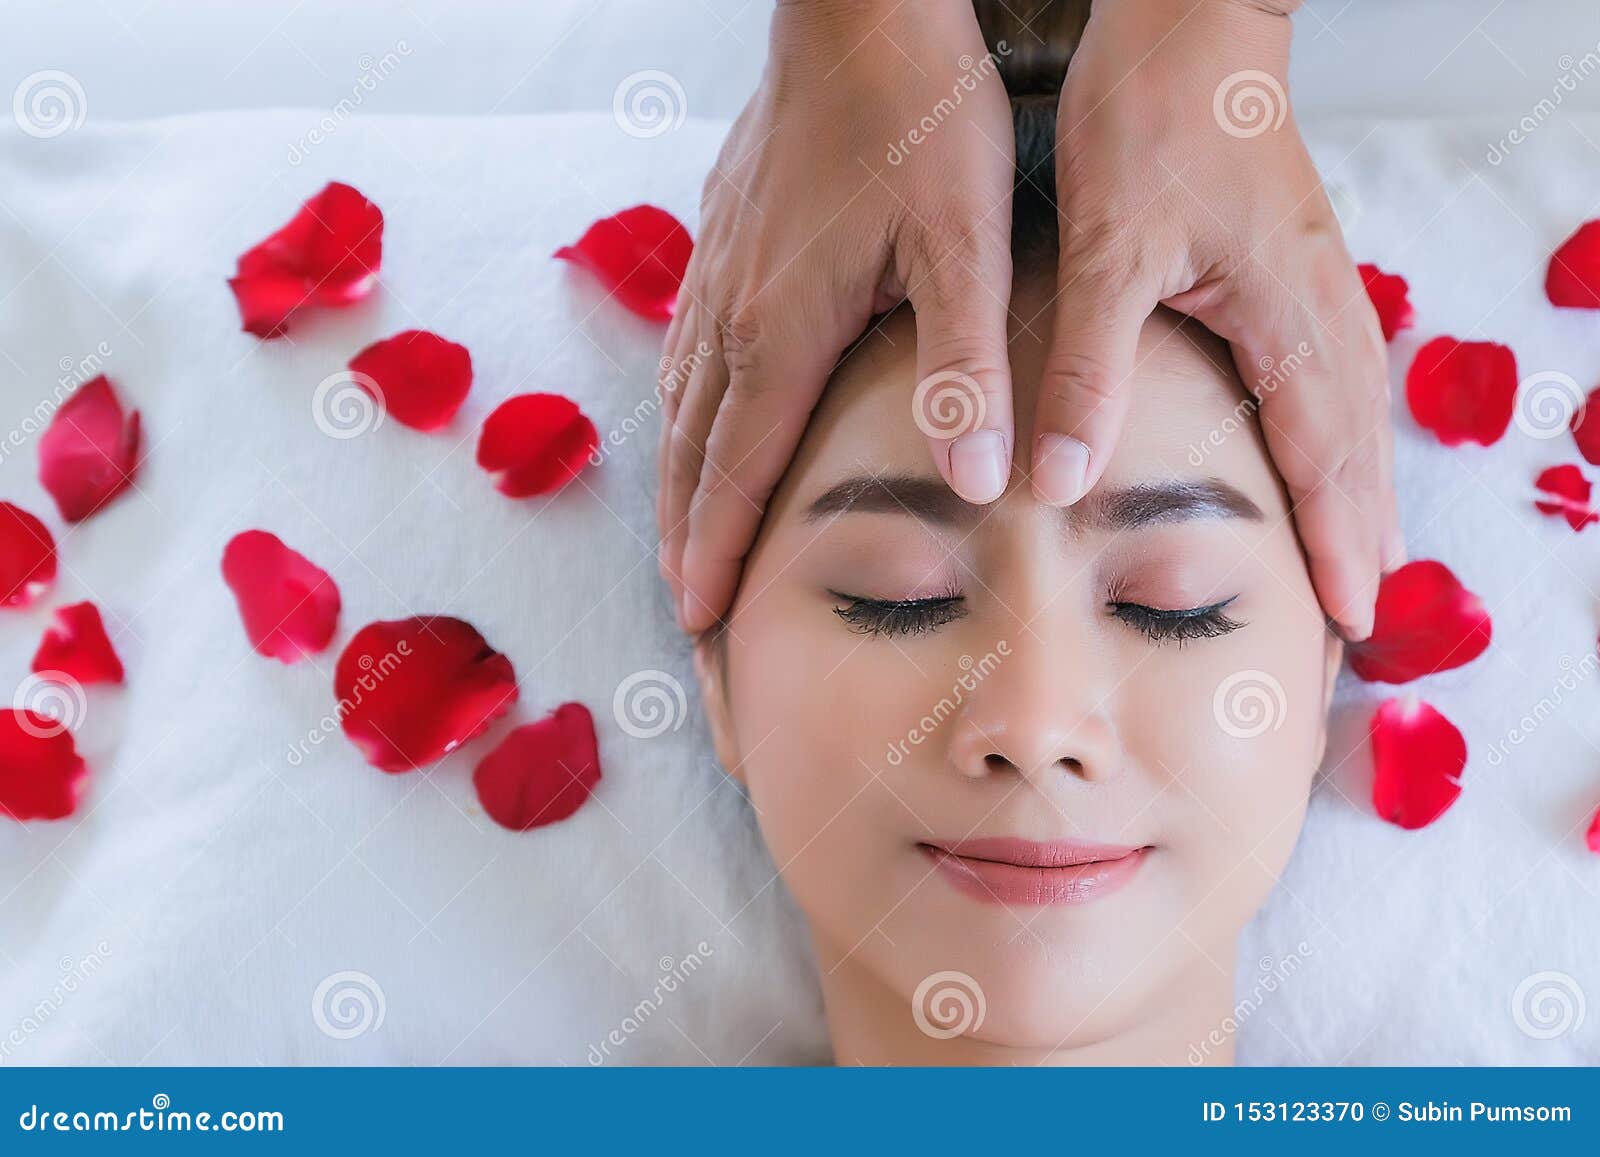 Close Up Face Women In Spa Facial Treatment Women Luxury Room Relax And Enjoyment Emotional